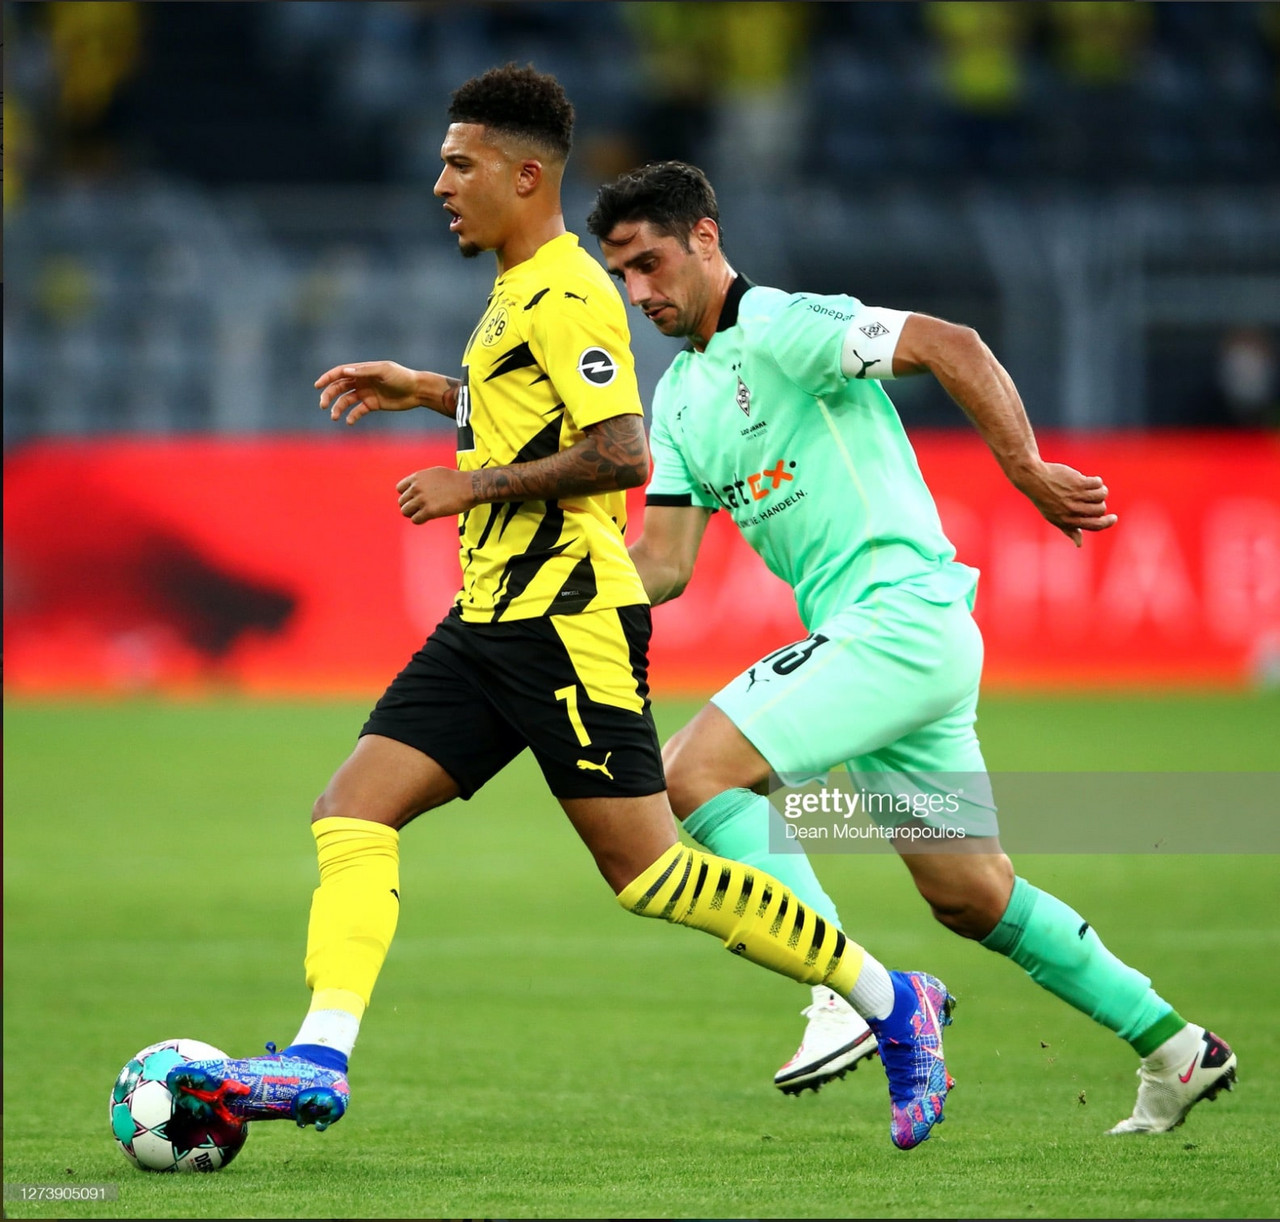 Borussia Monchengladbach vs Borussia Dortmund preview: How to watch, kick-off time, team news, predicted lineups and ones to watch